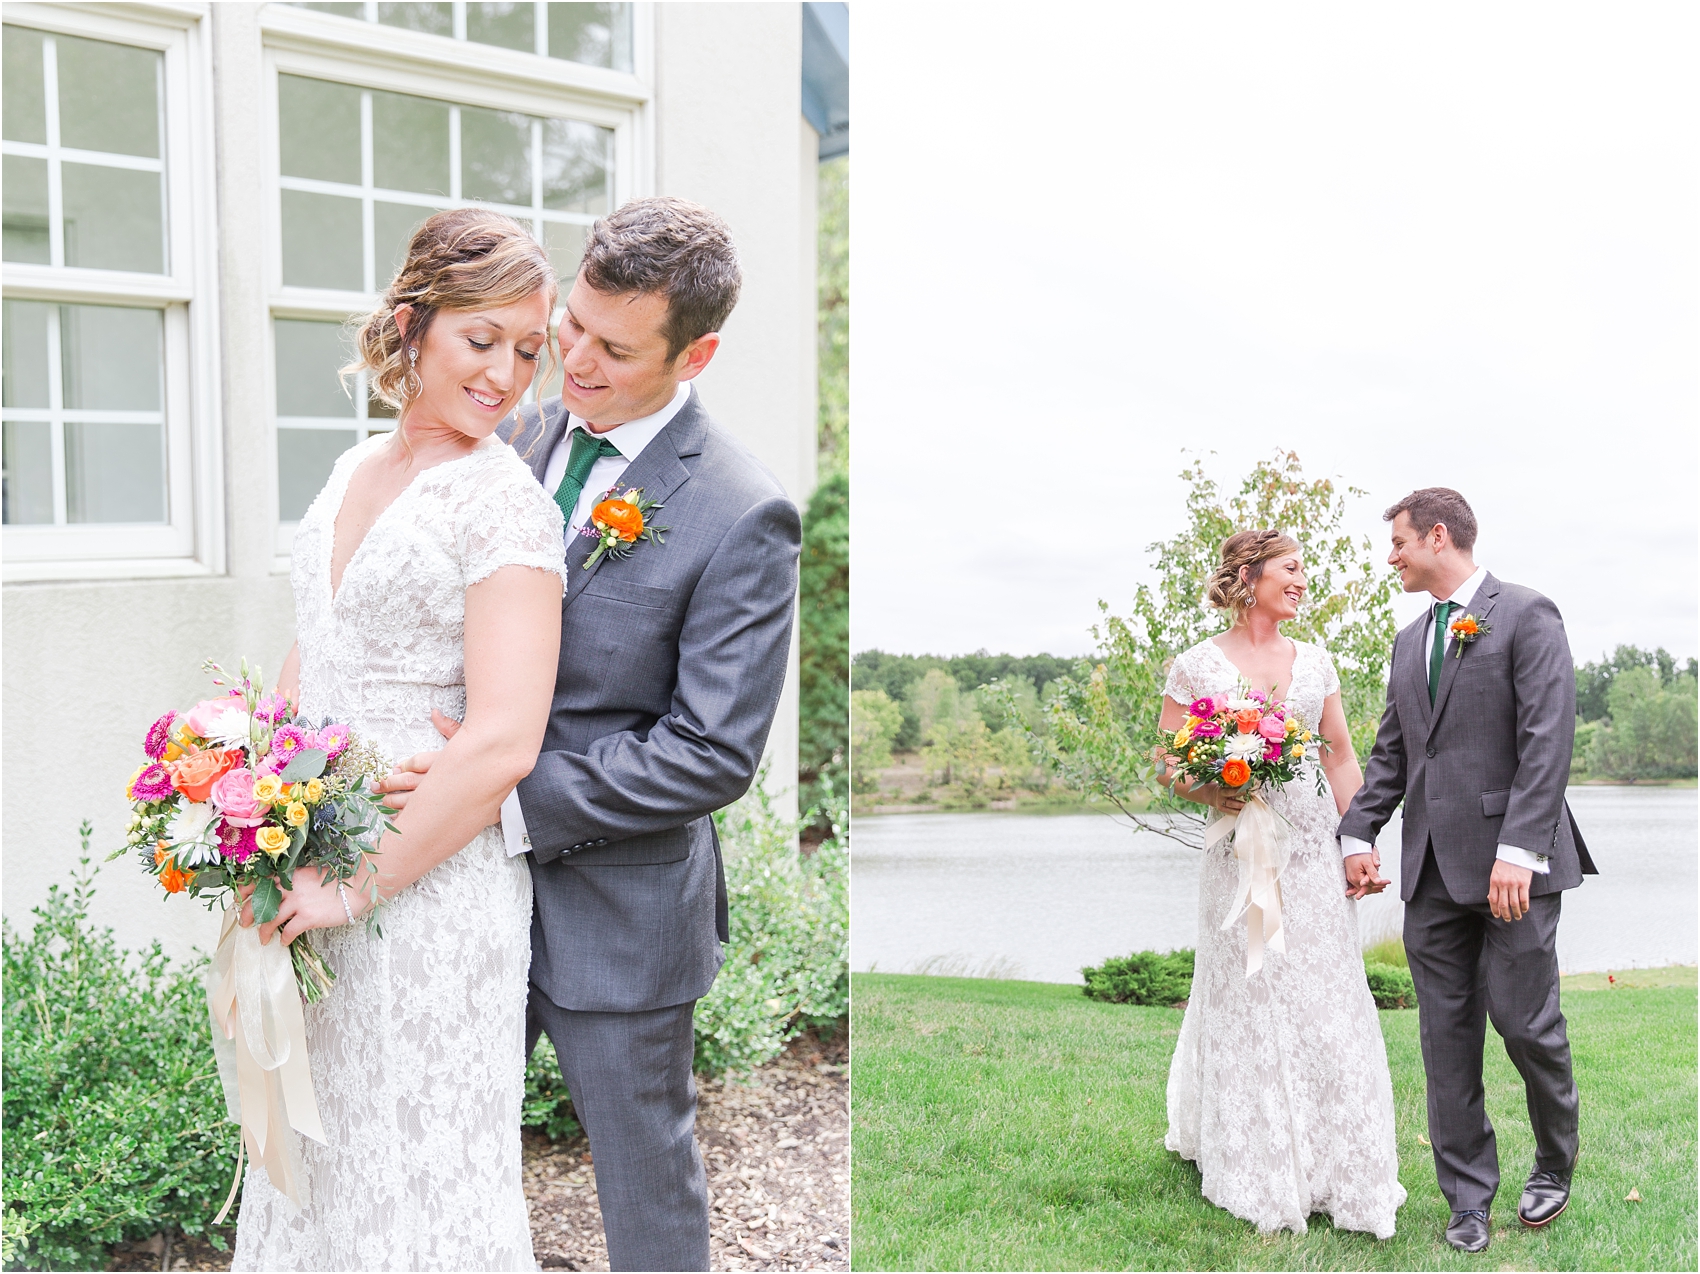 romantic-intimate-backyard-wedding-photos-at-private-estate-in-ann-arbor-mi-by-courtney-carolyn-photography_0042.jpg